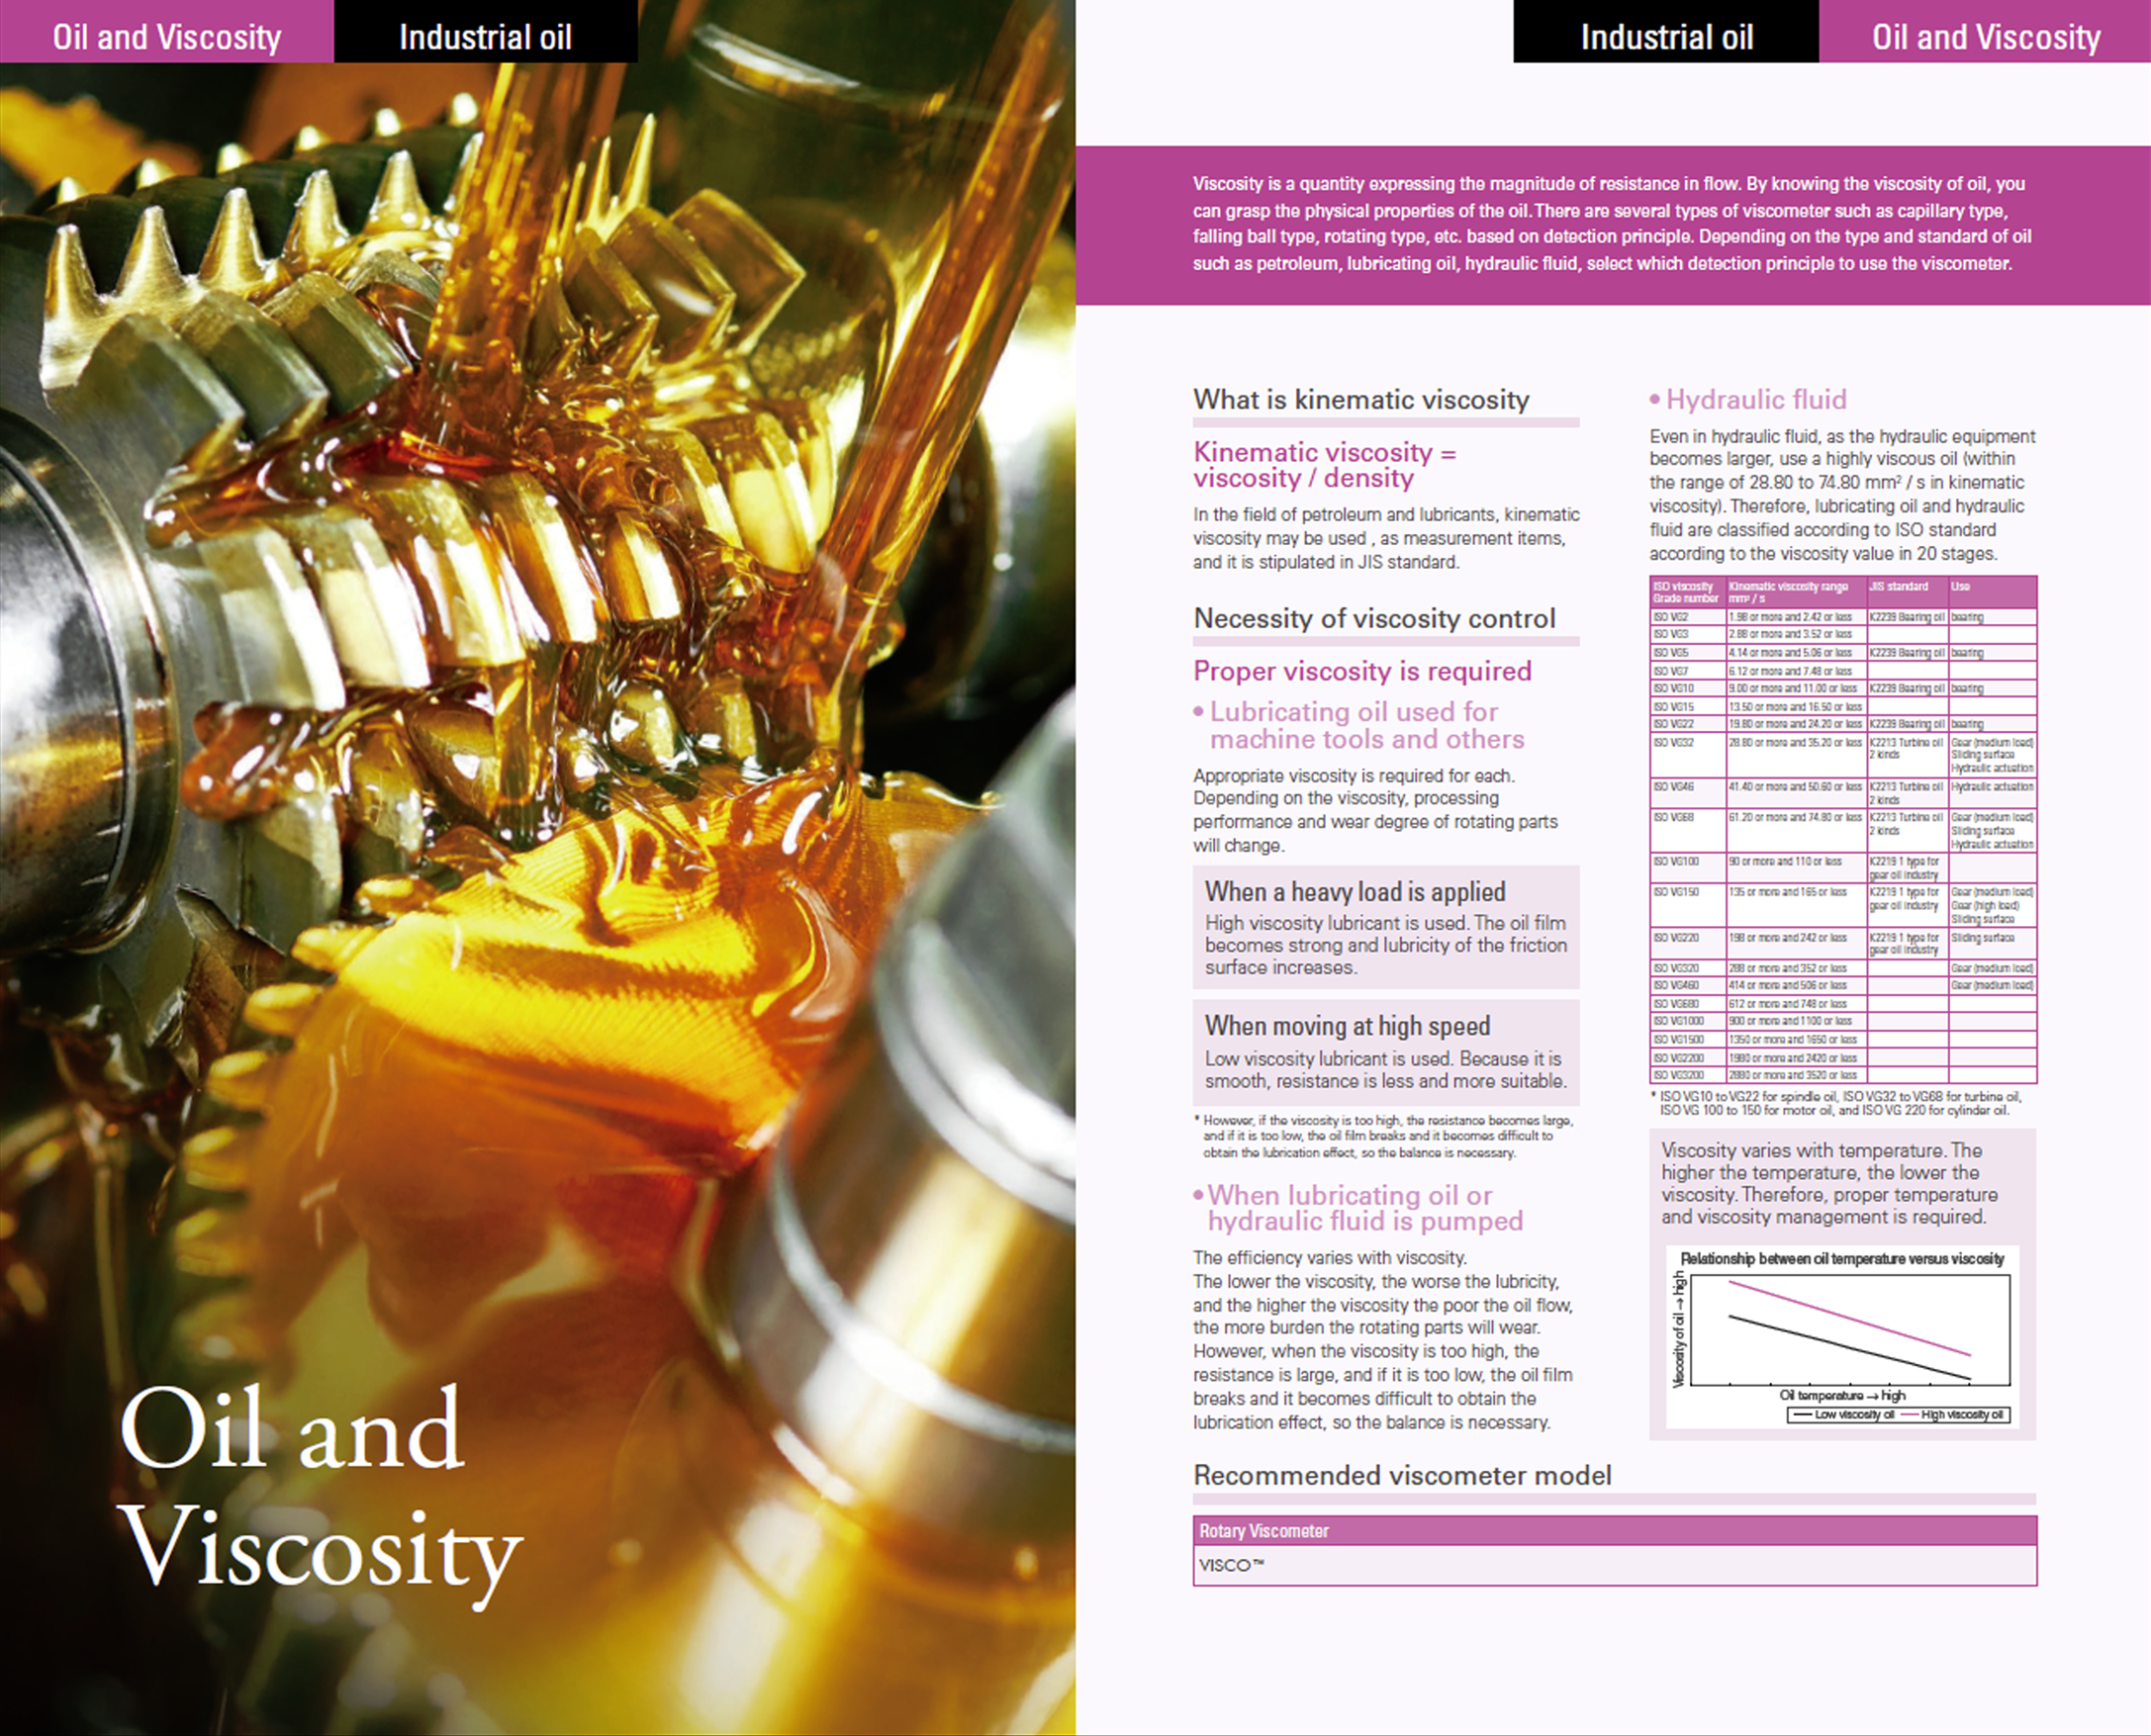 Oil and Viscosity